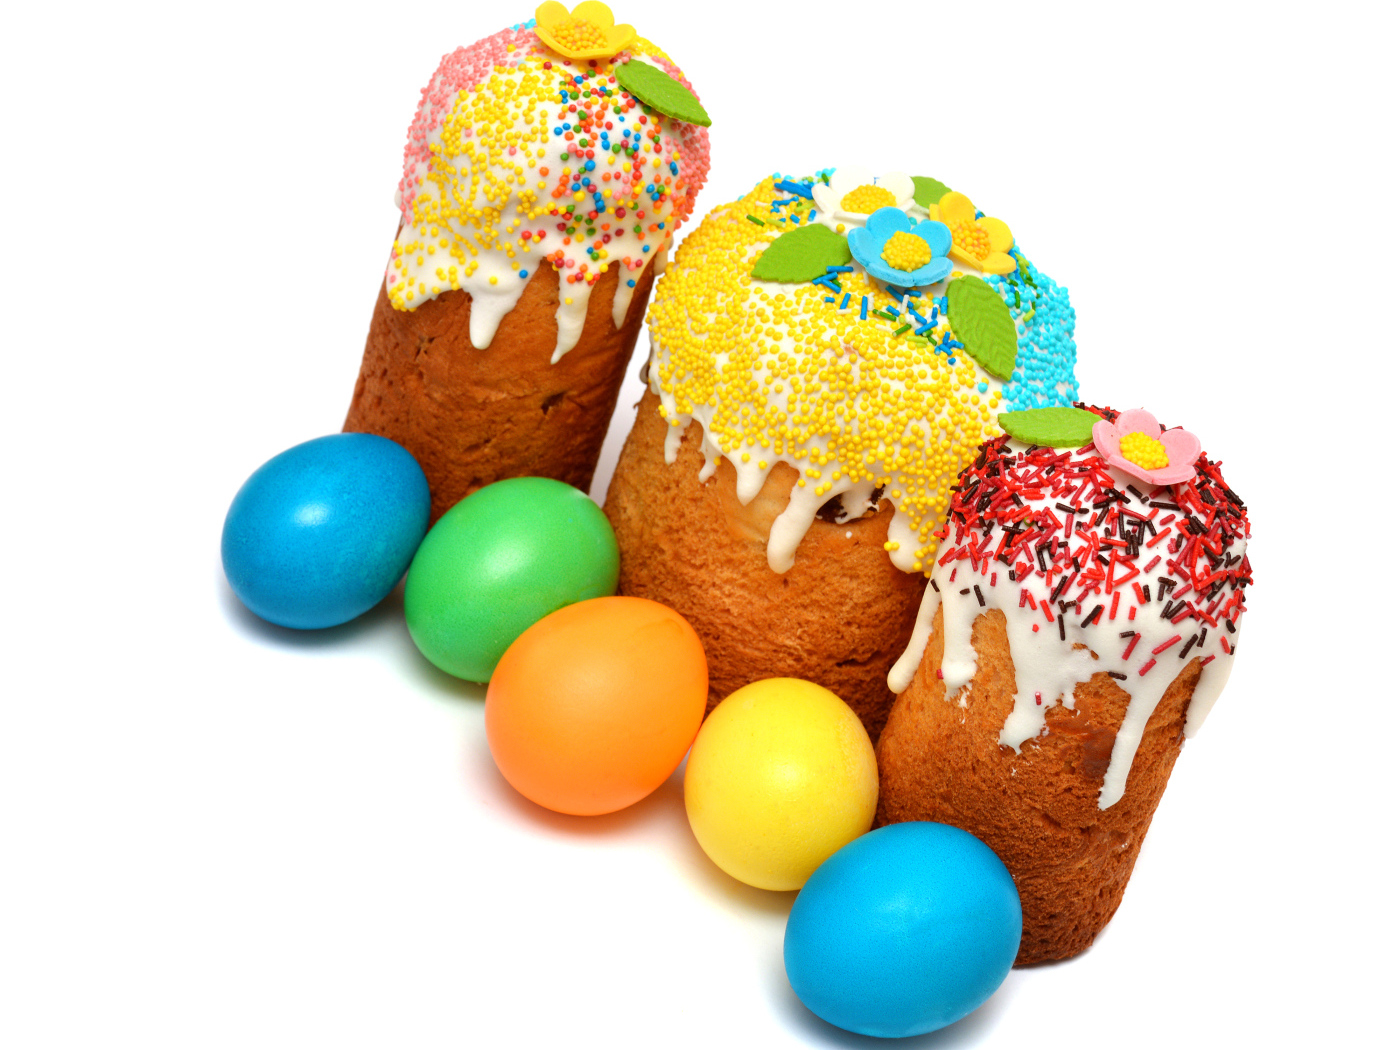 Three Easter cakes with painted eggs on a white background for the holiday Easter